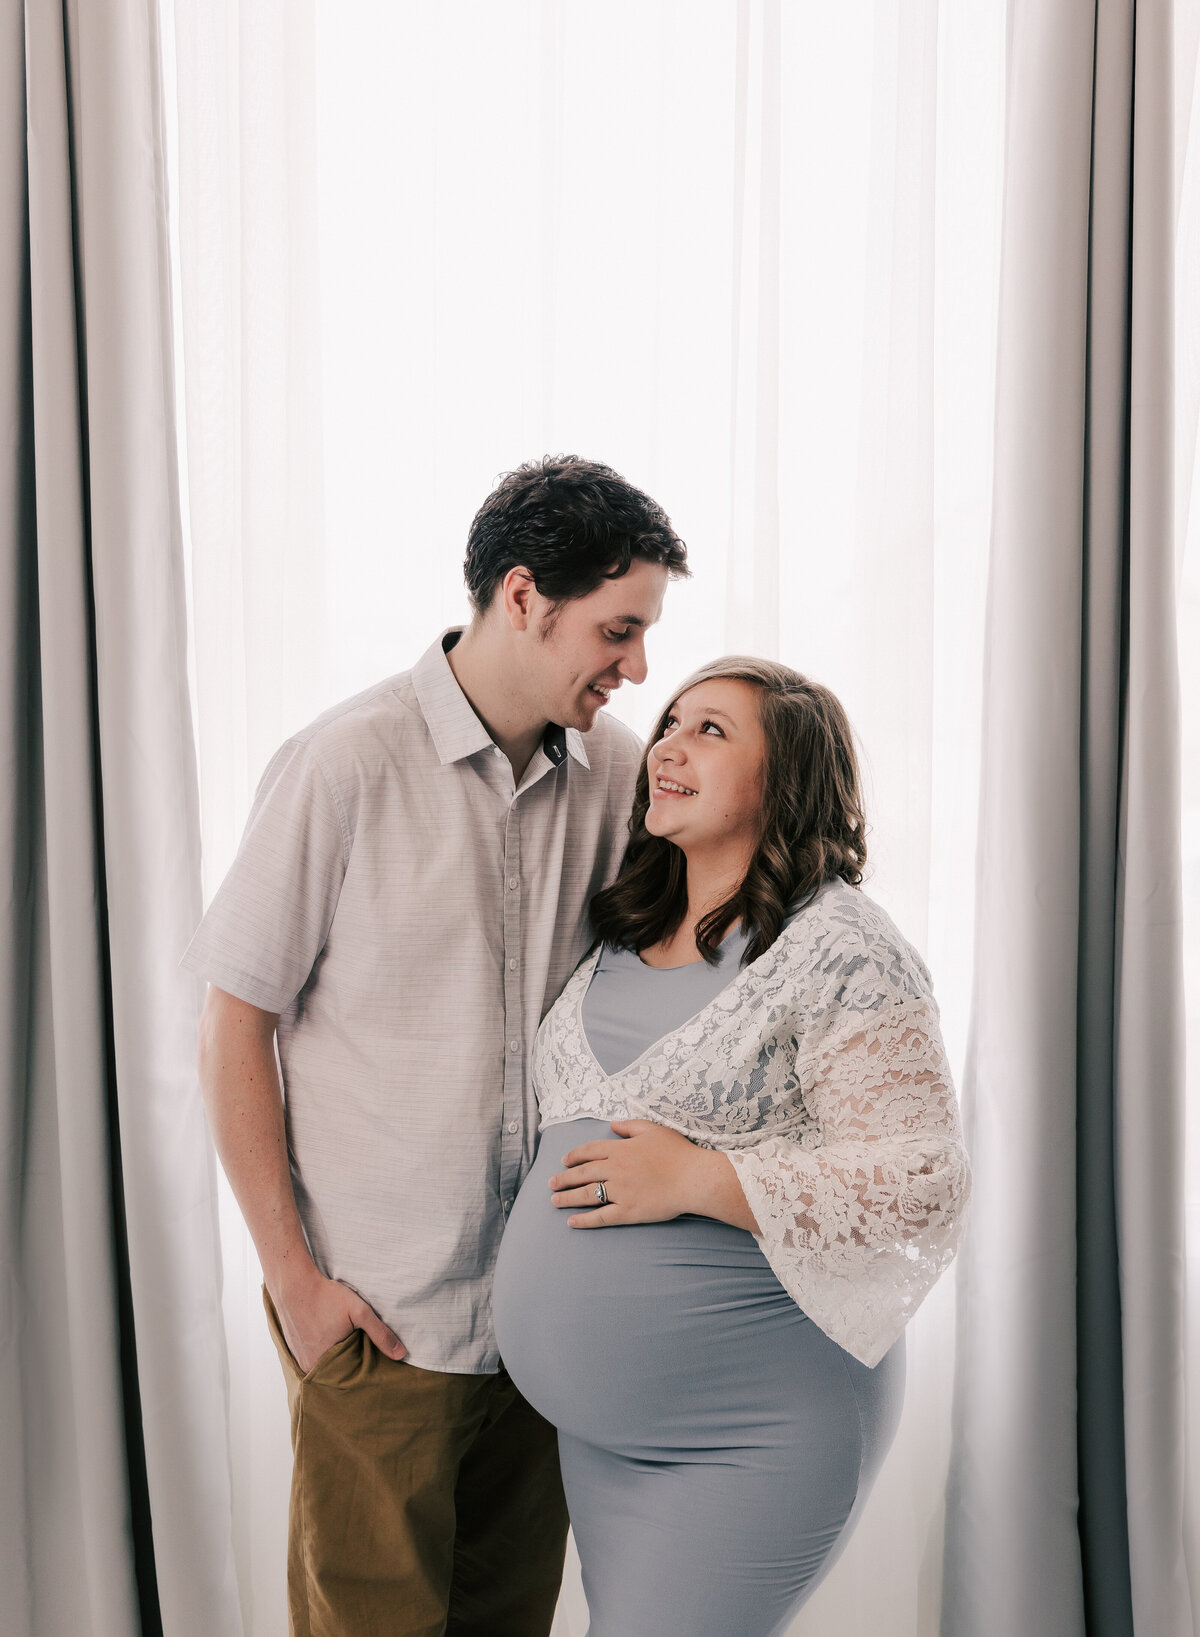 A cute young couple during their maternity photo shoot at Diane Owen Photography studio.